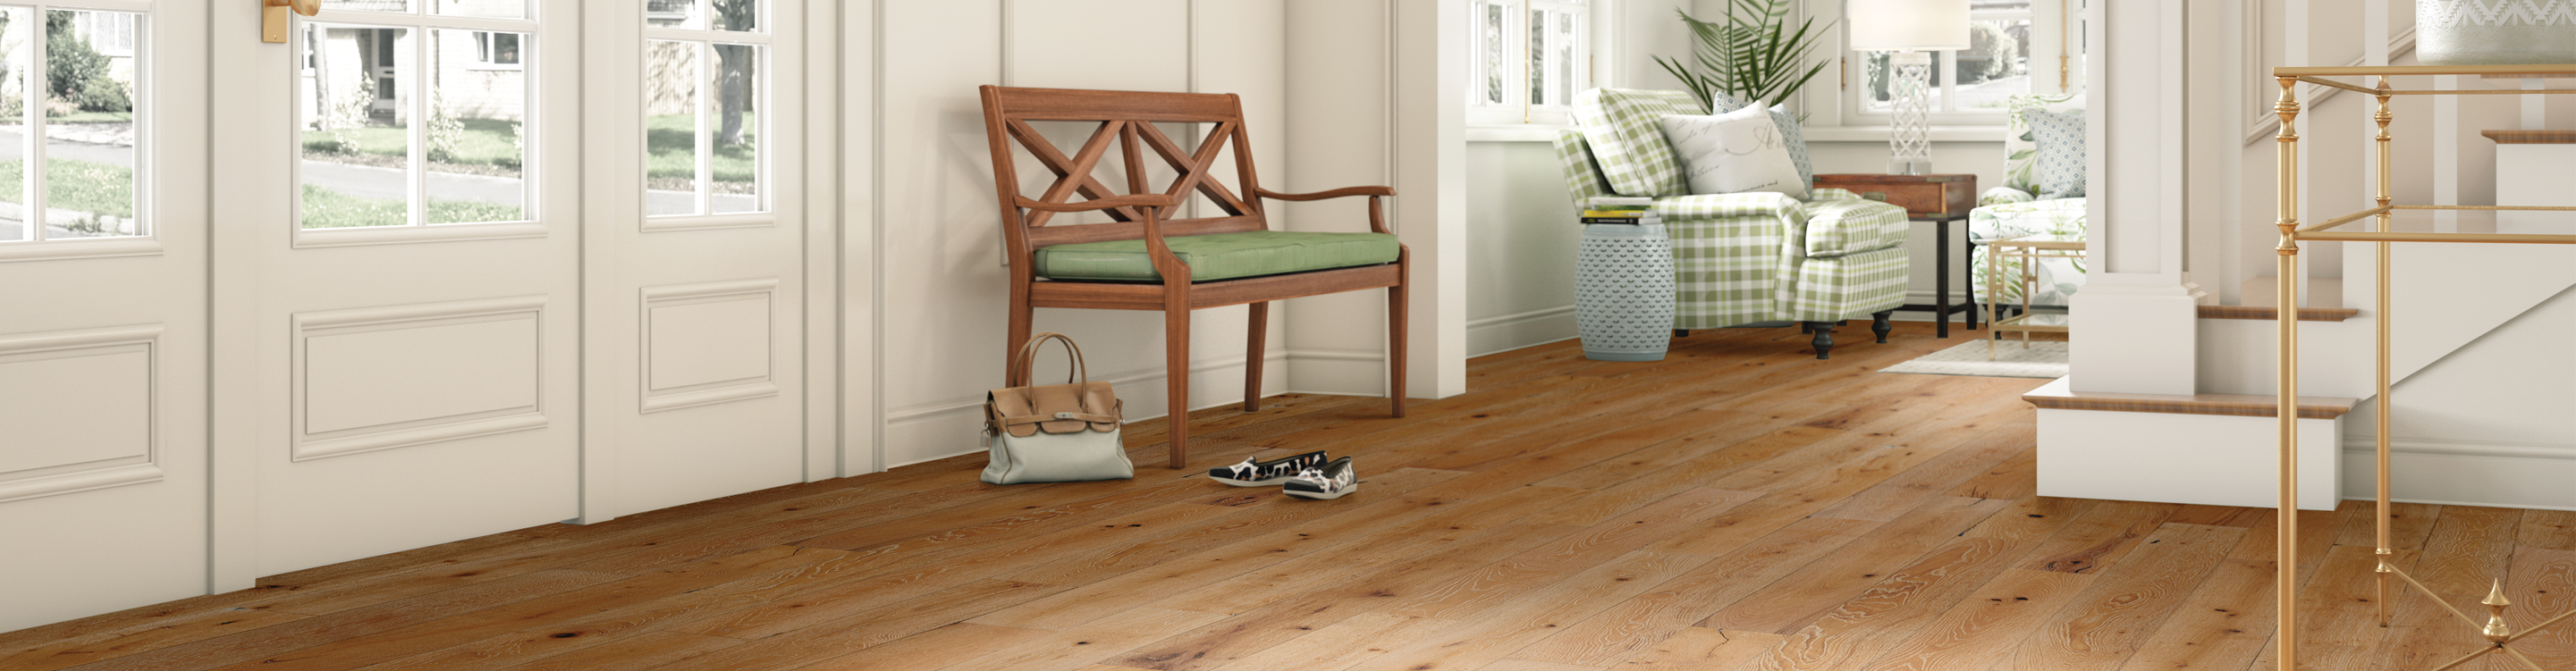 Oak hardwood floor in entryway with green cushion bench and stairs 